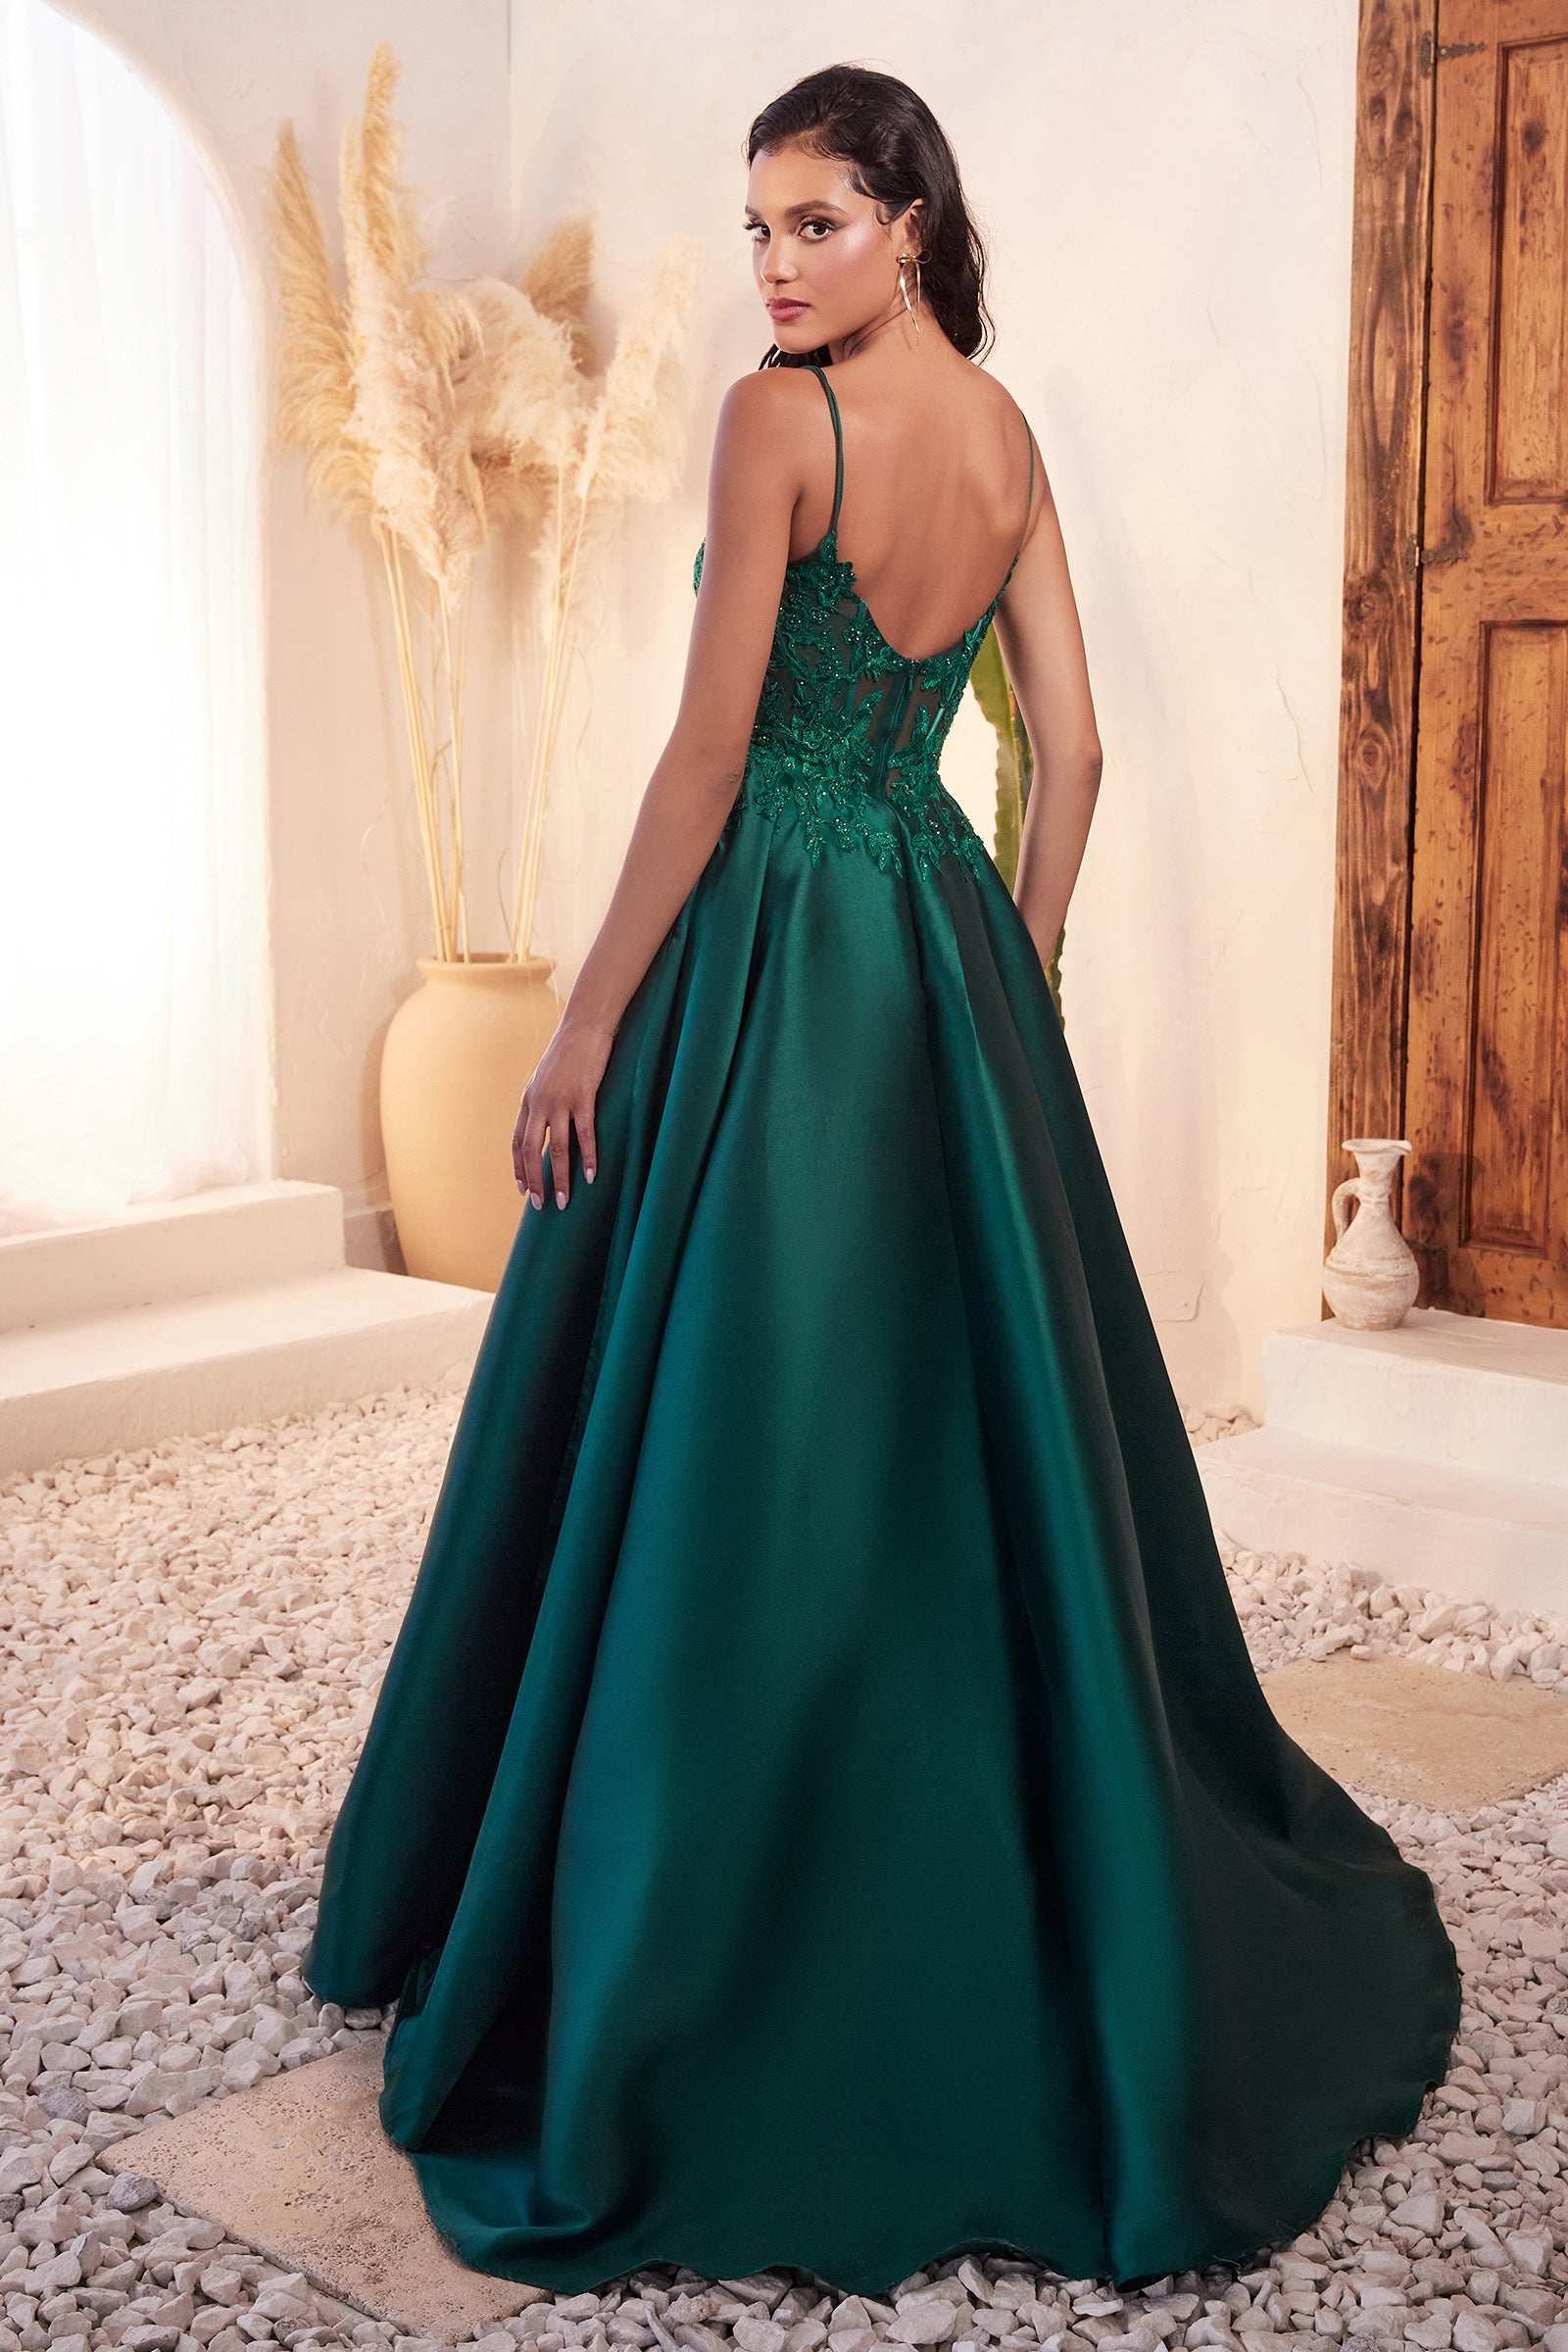 PURDIE Emerald Green Mikado Satin Lace A Line Ball Gown Prom & Formal Dress